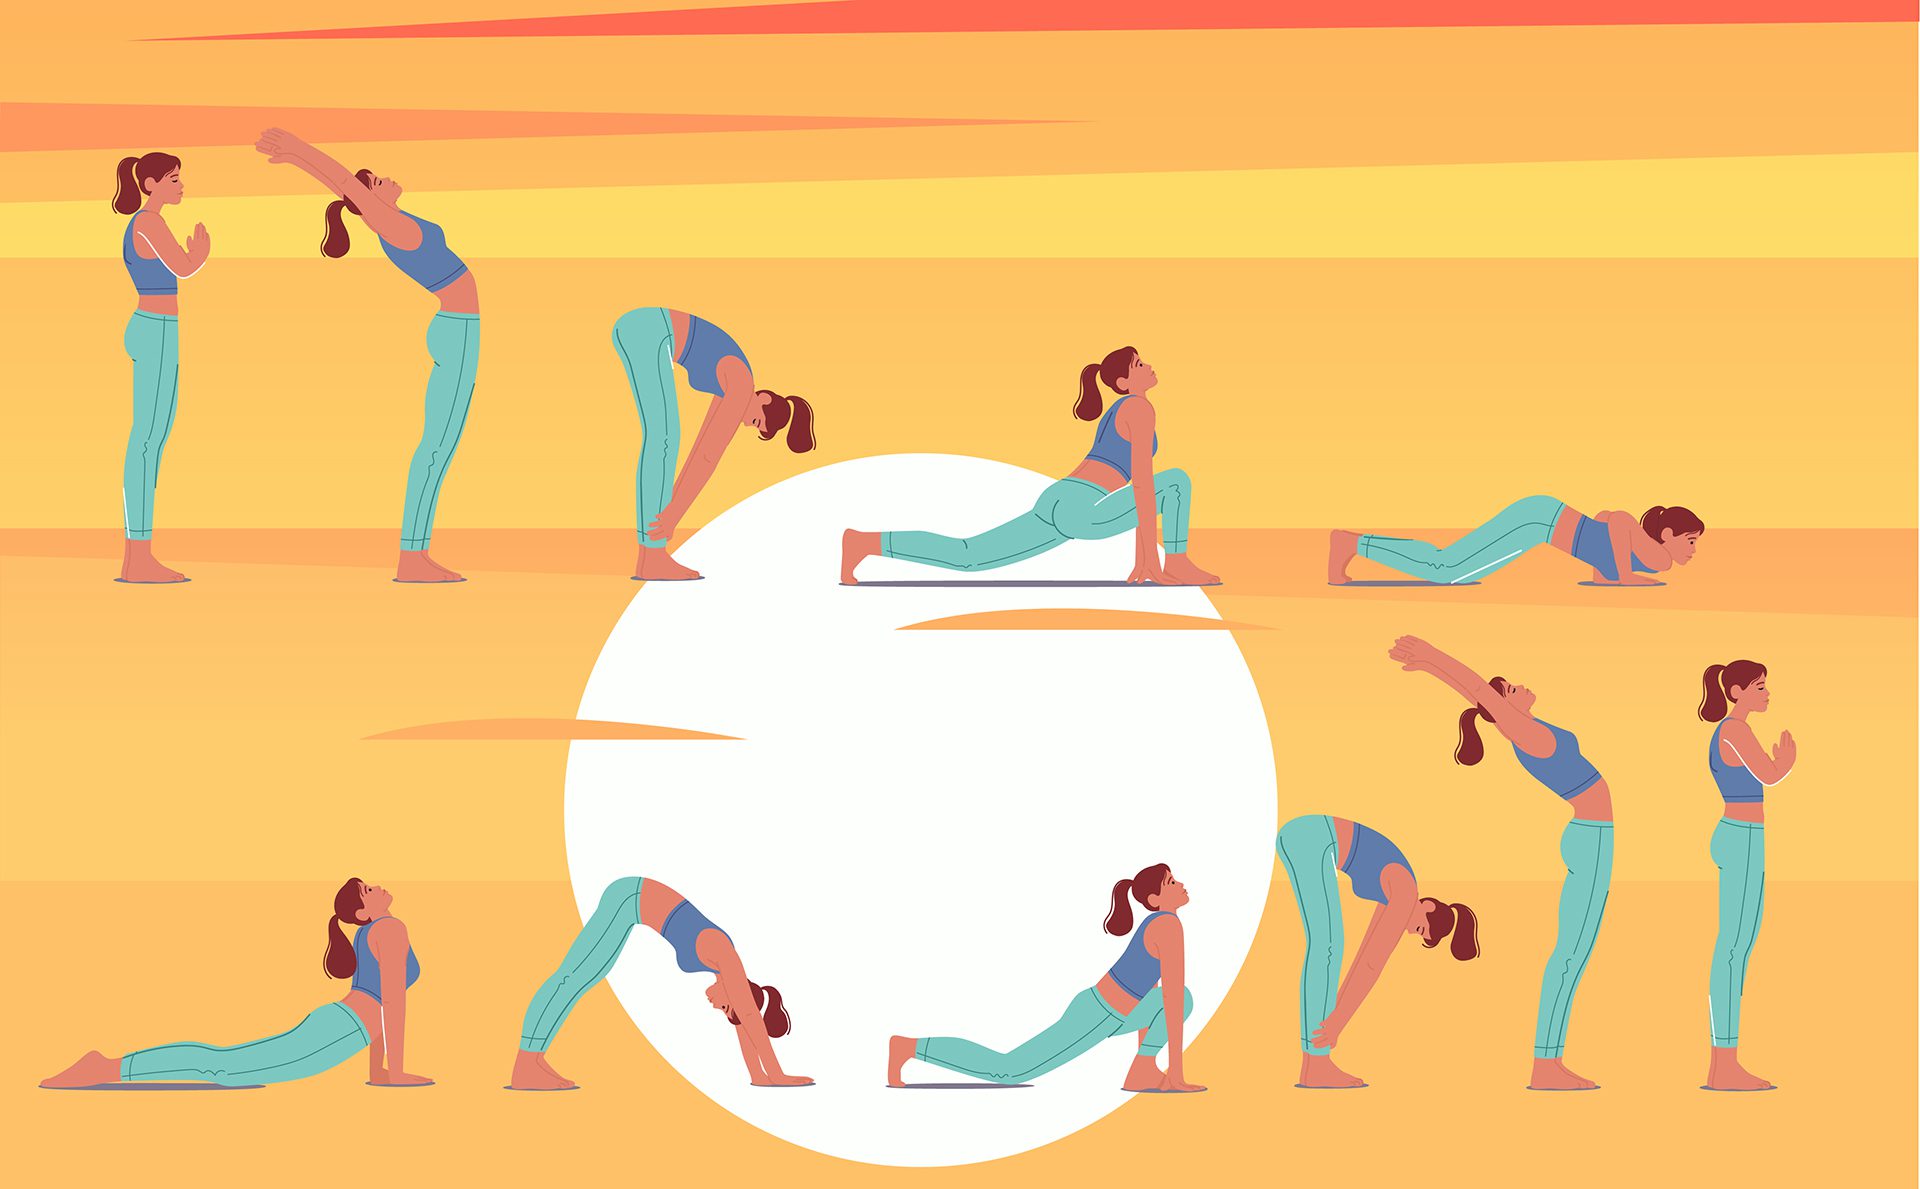 A step-by-step guide on how to do Surya Namaskar or Sun Salutations